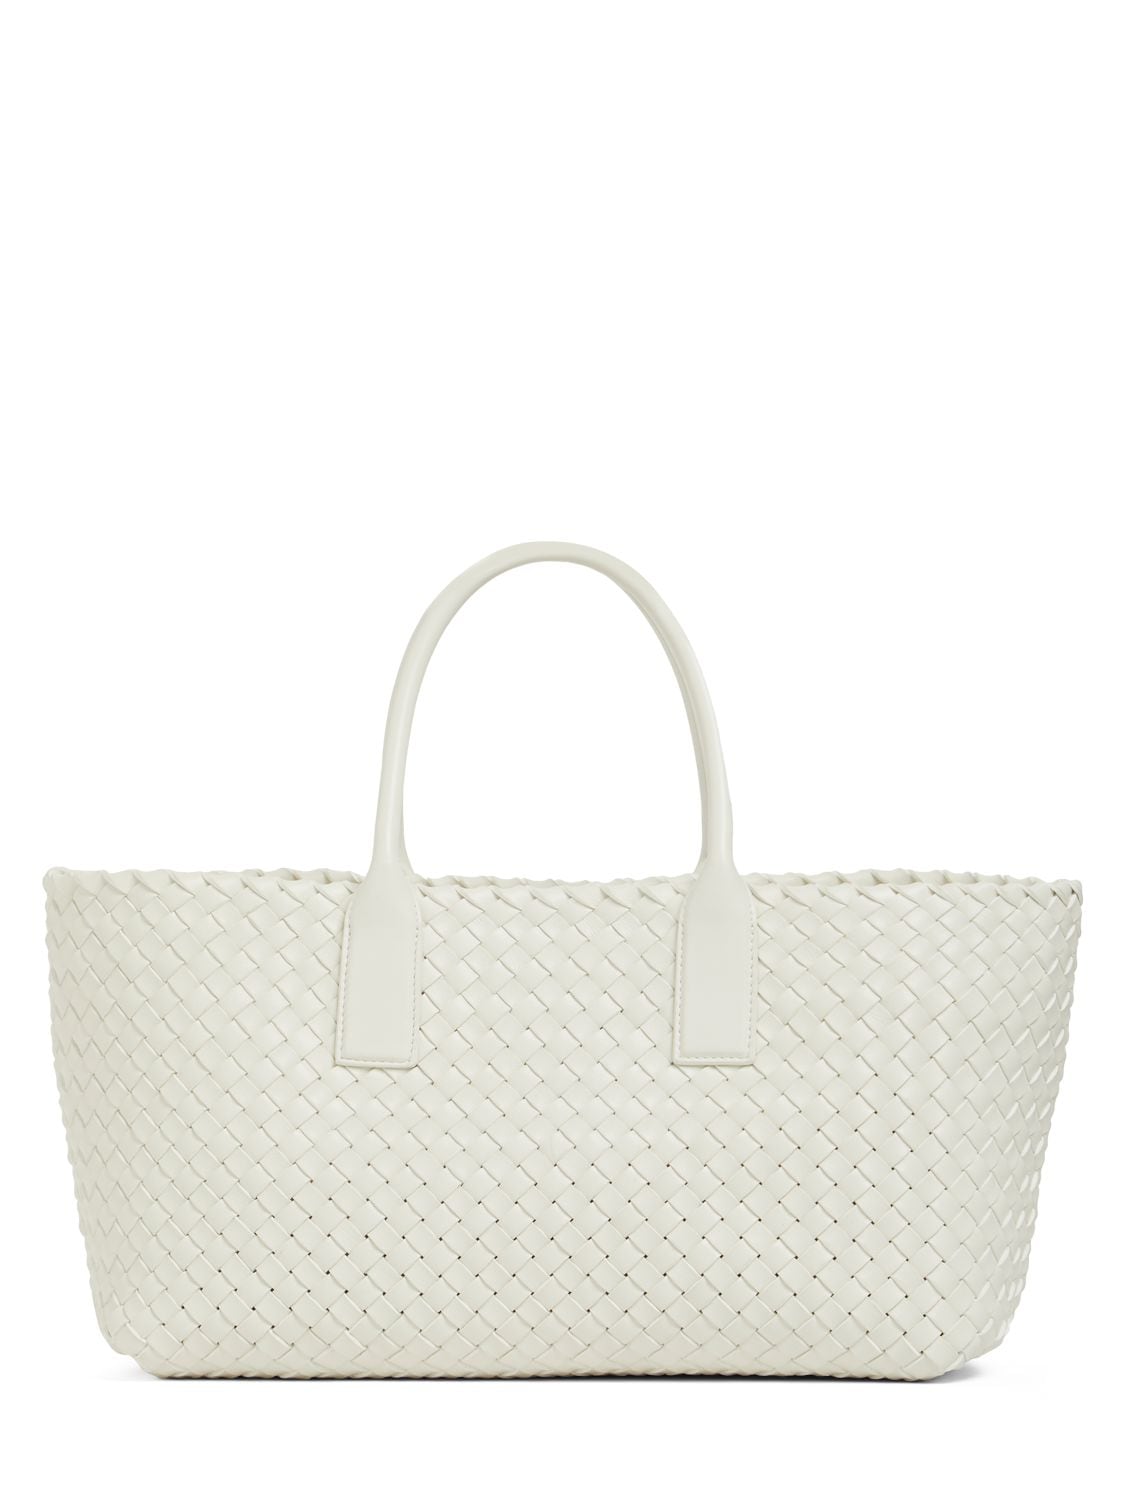 Image of Small Cabat Leather Tote